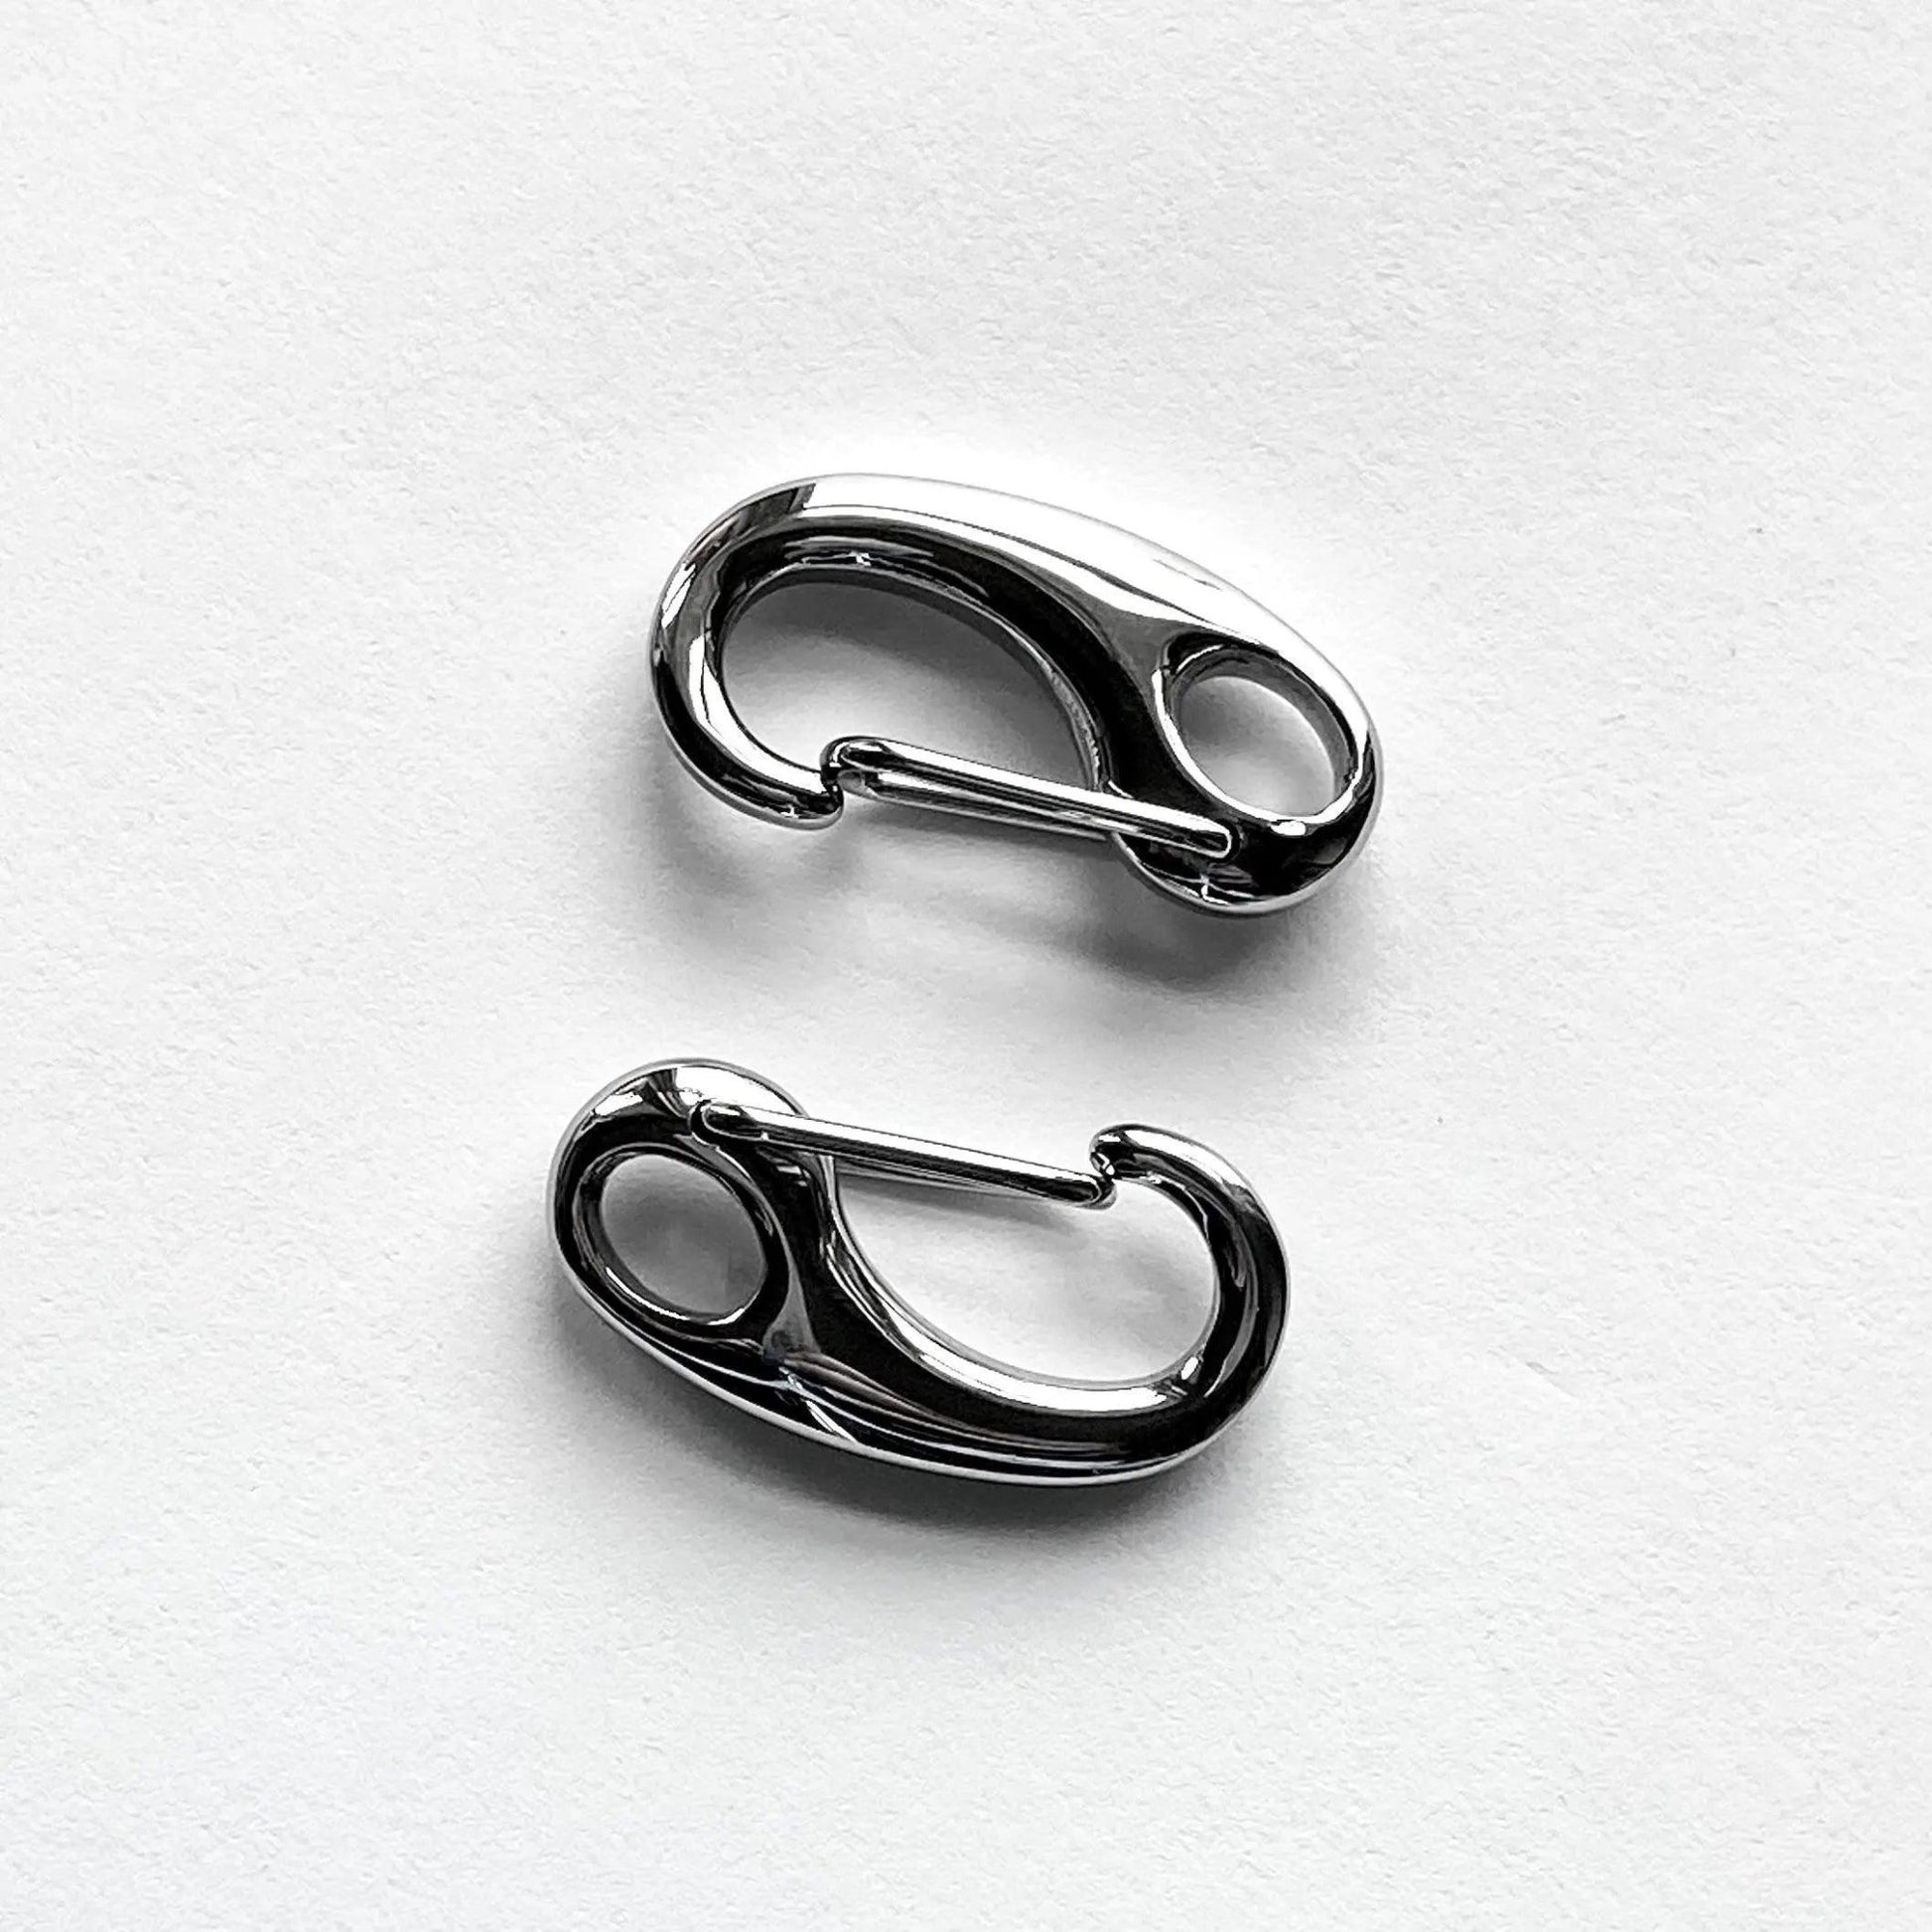 1 IN (26mm) STAINLESS STEEL Teardrop Snap Clasp (5 pack) - Paracord Galaxy